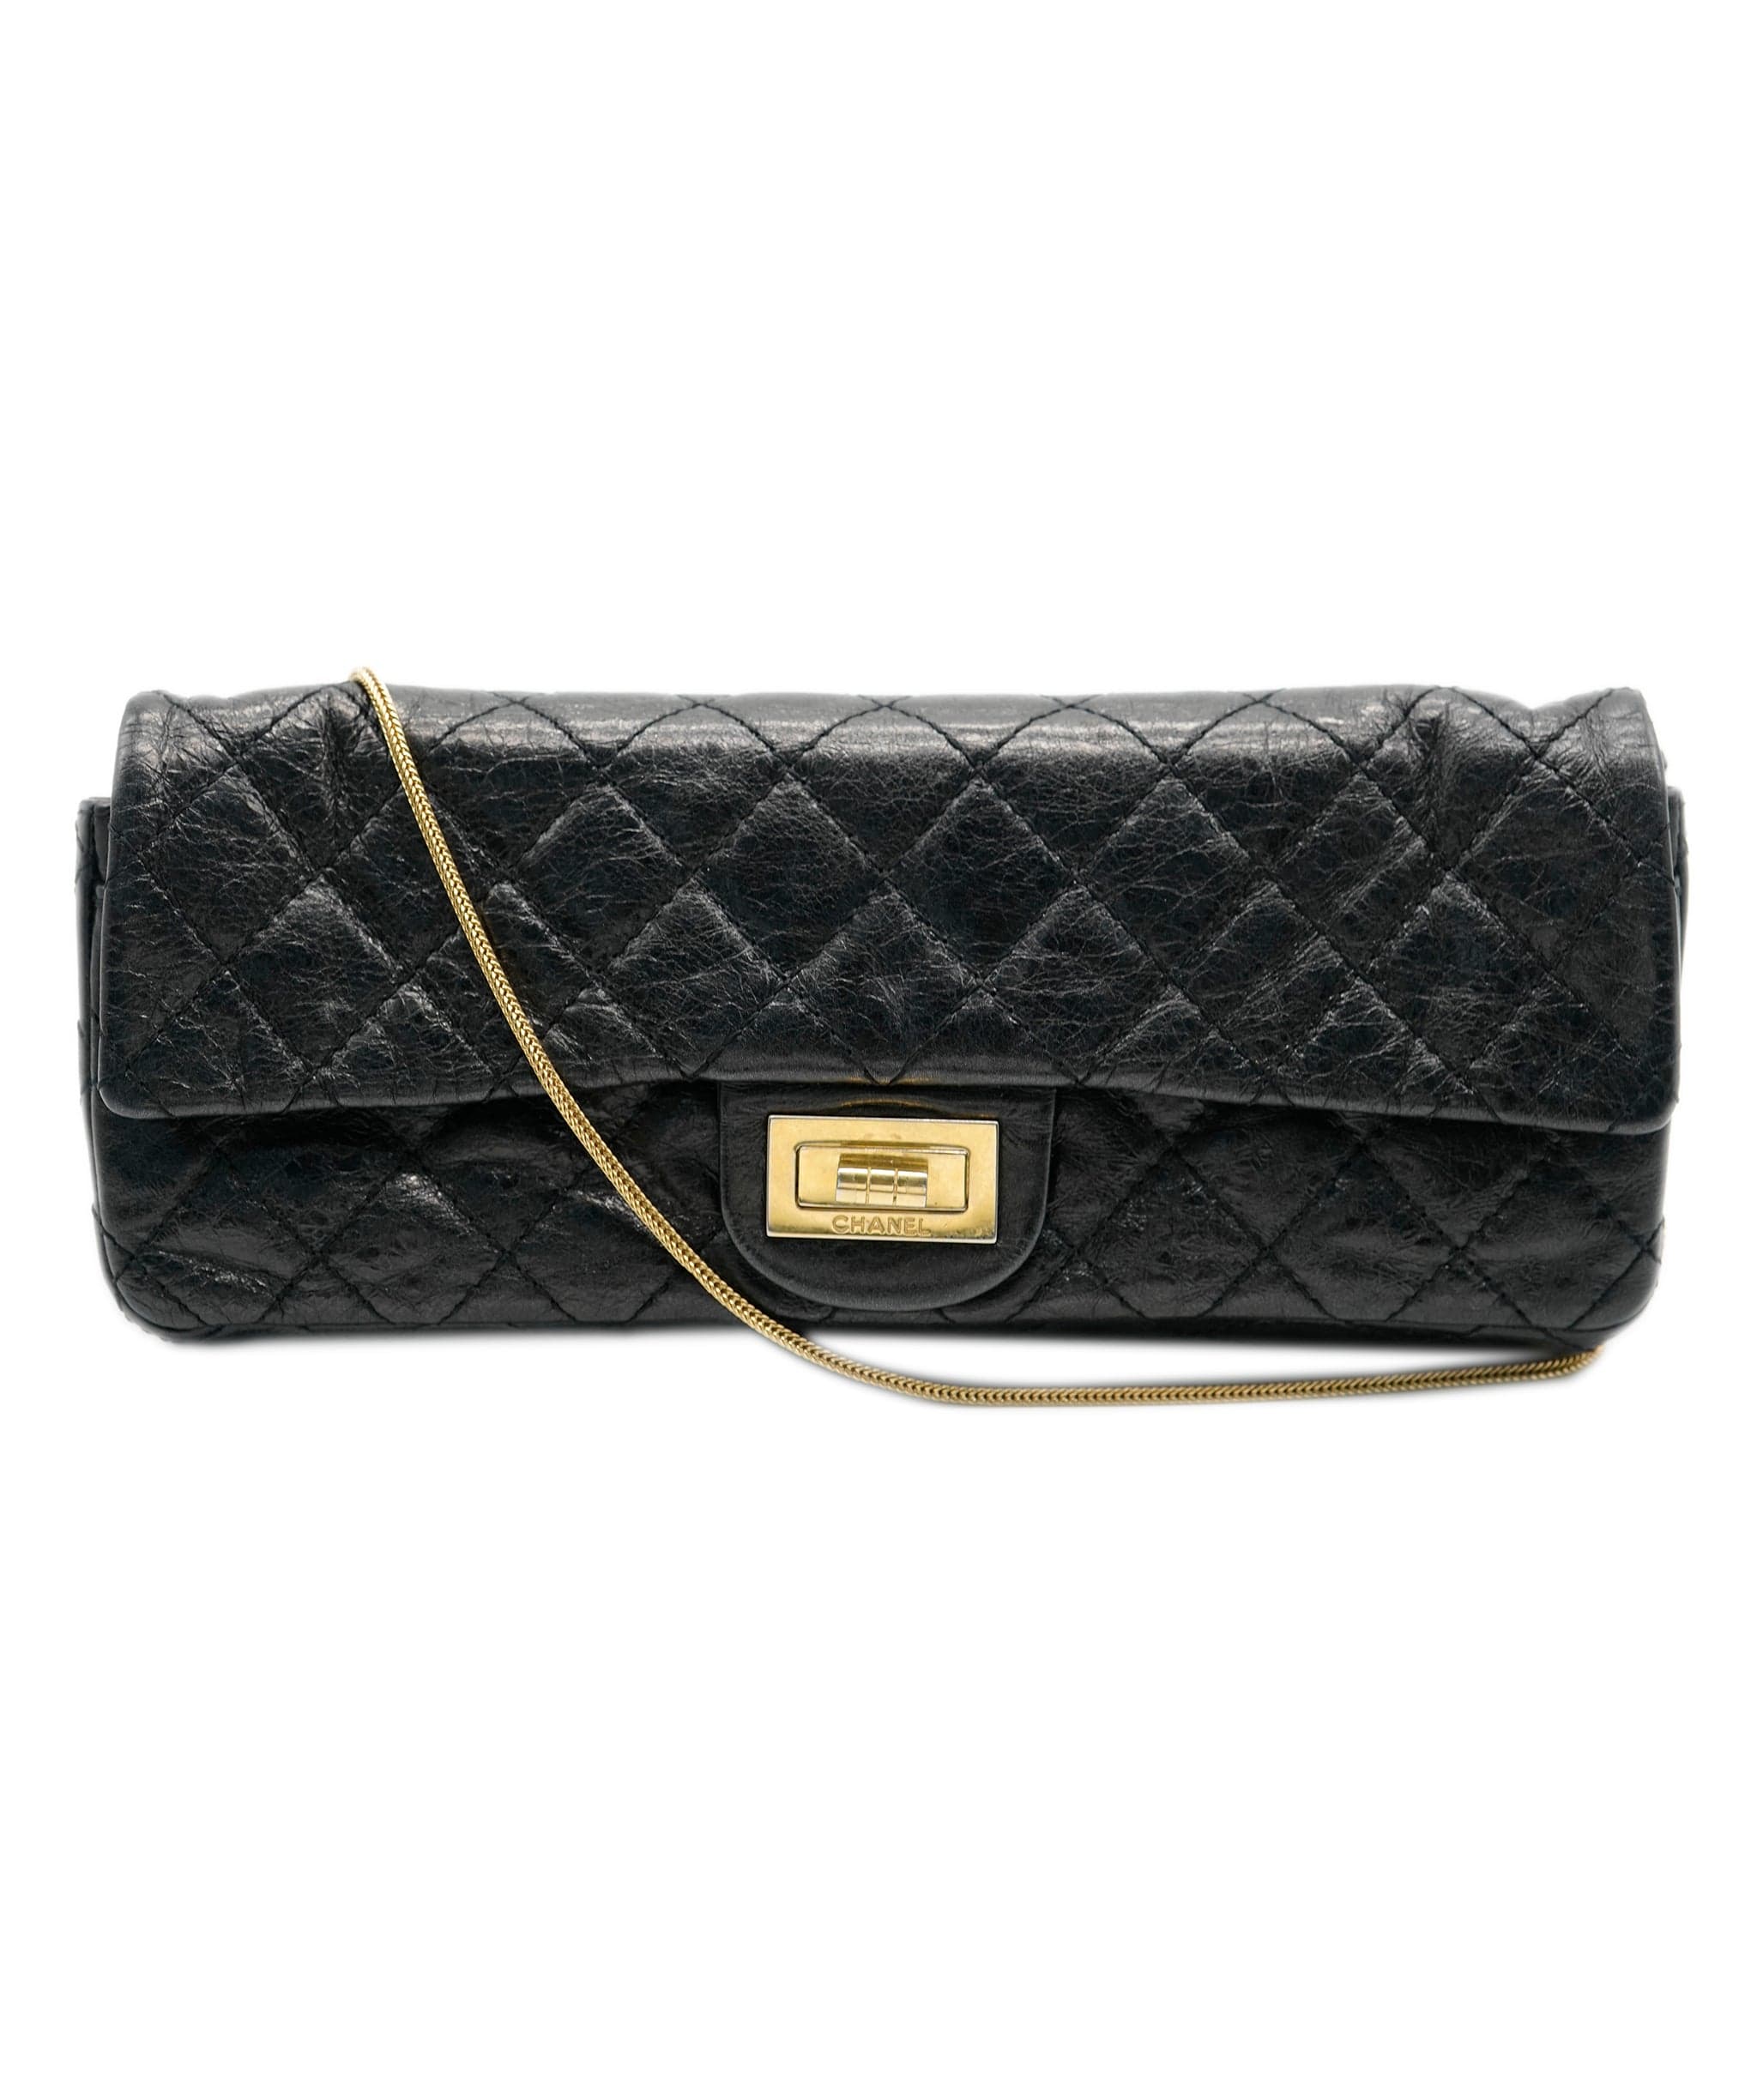 Chanel Vintage Chanel Black Long Timeless GHW ALC0578